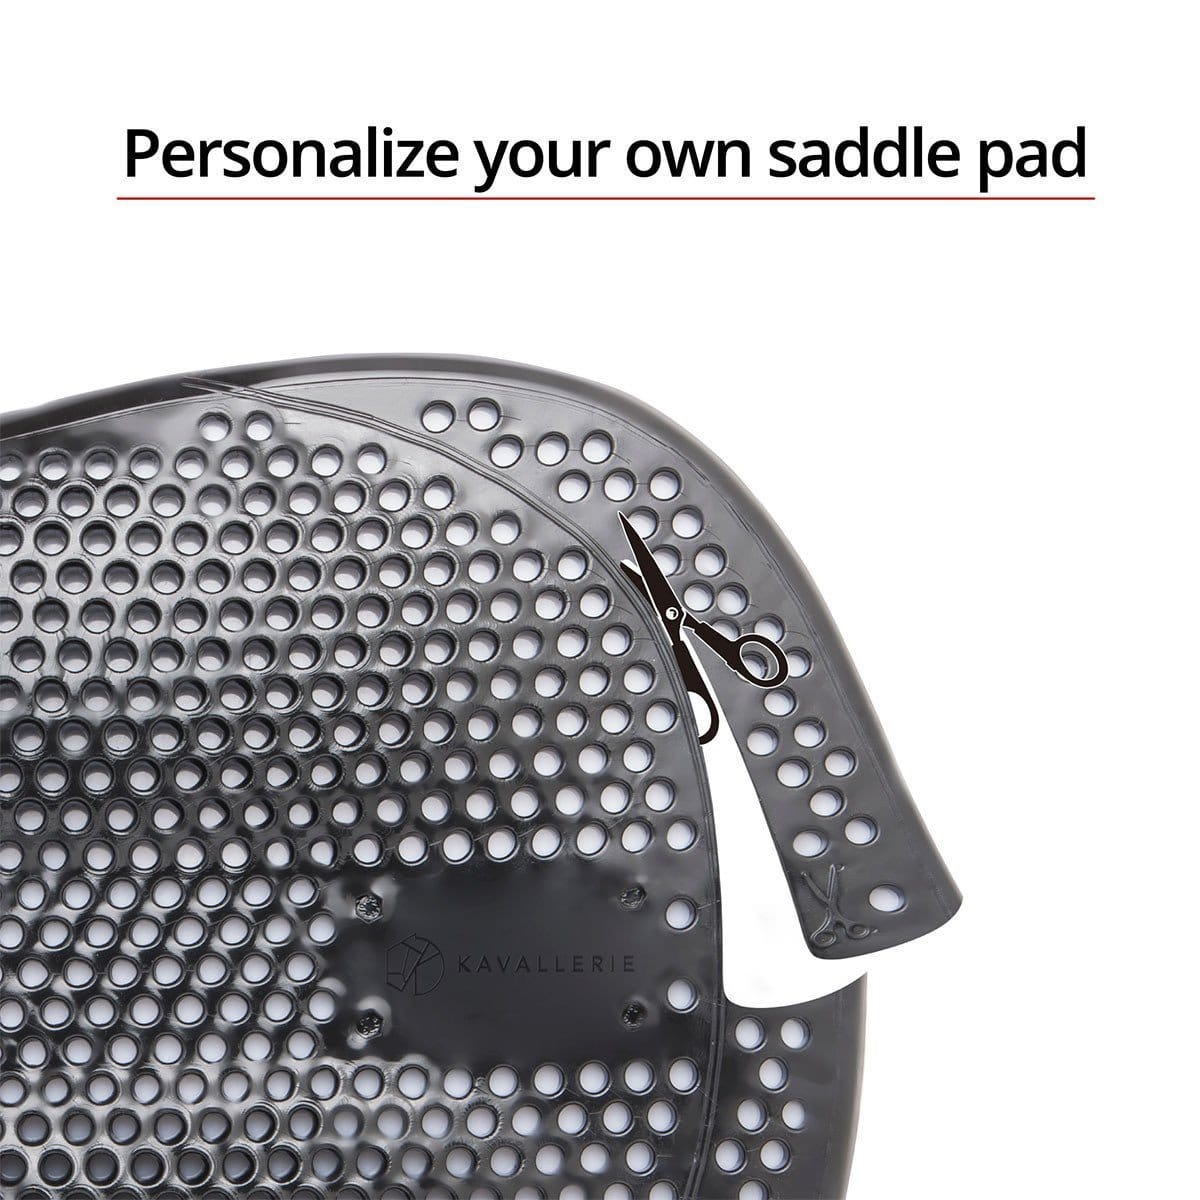 Kavallerie Seat Saver Gel Saddle Pad - Helps with Saddle Bridging, Sore Back, Swayed Back, High Withers - English Pad for Horses, Wash